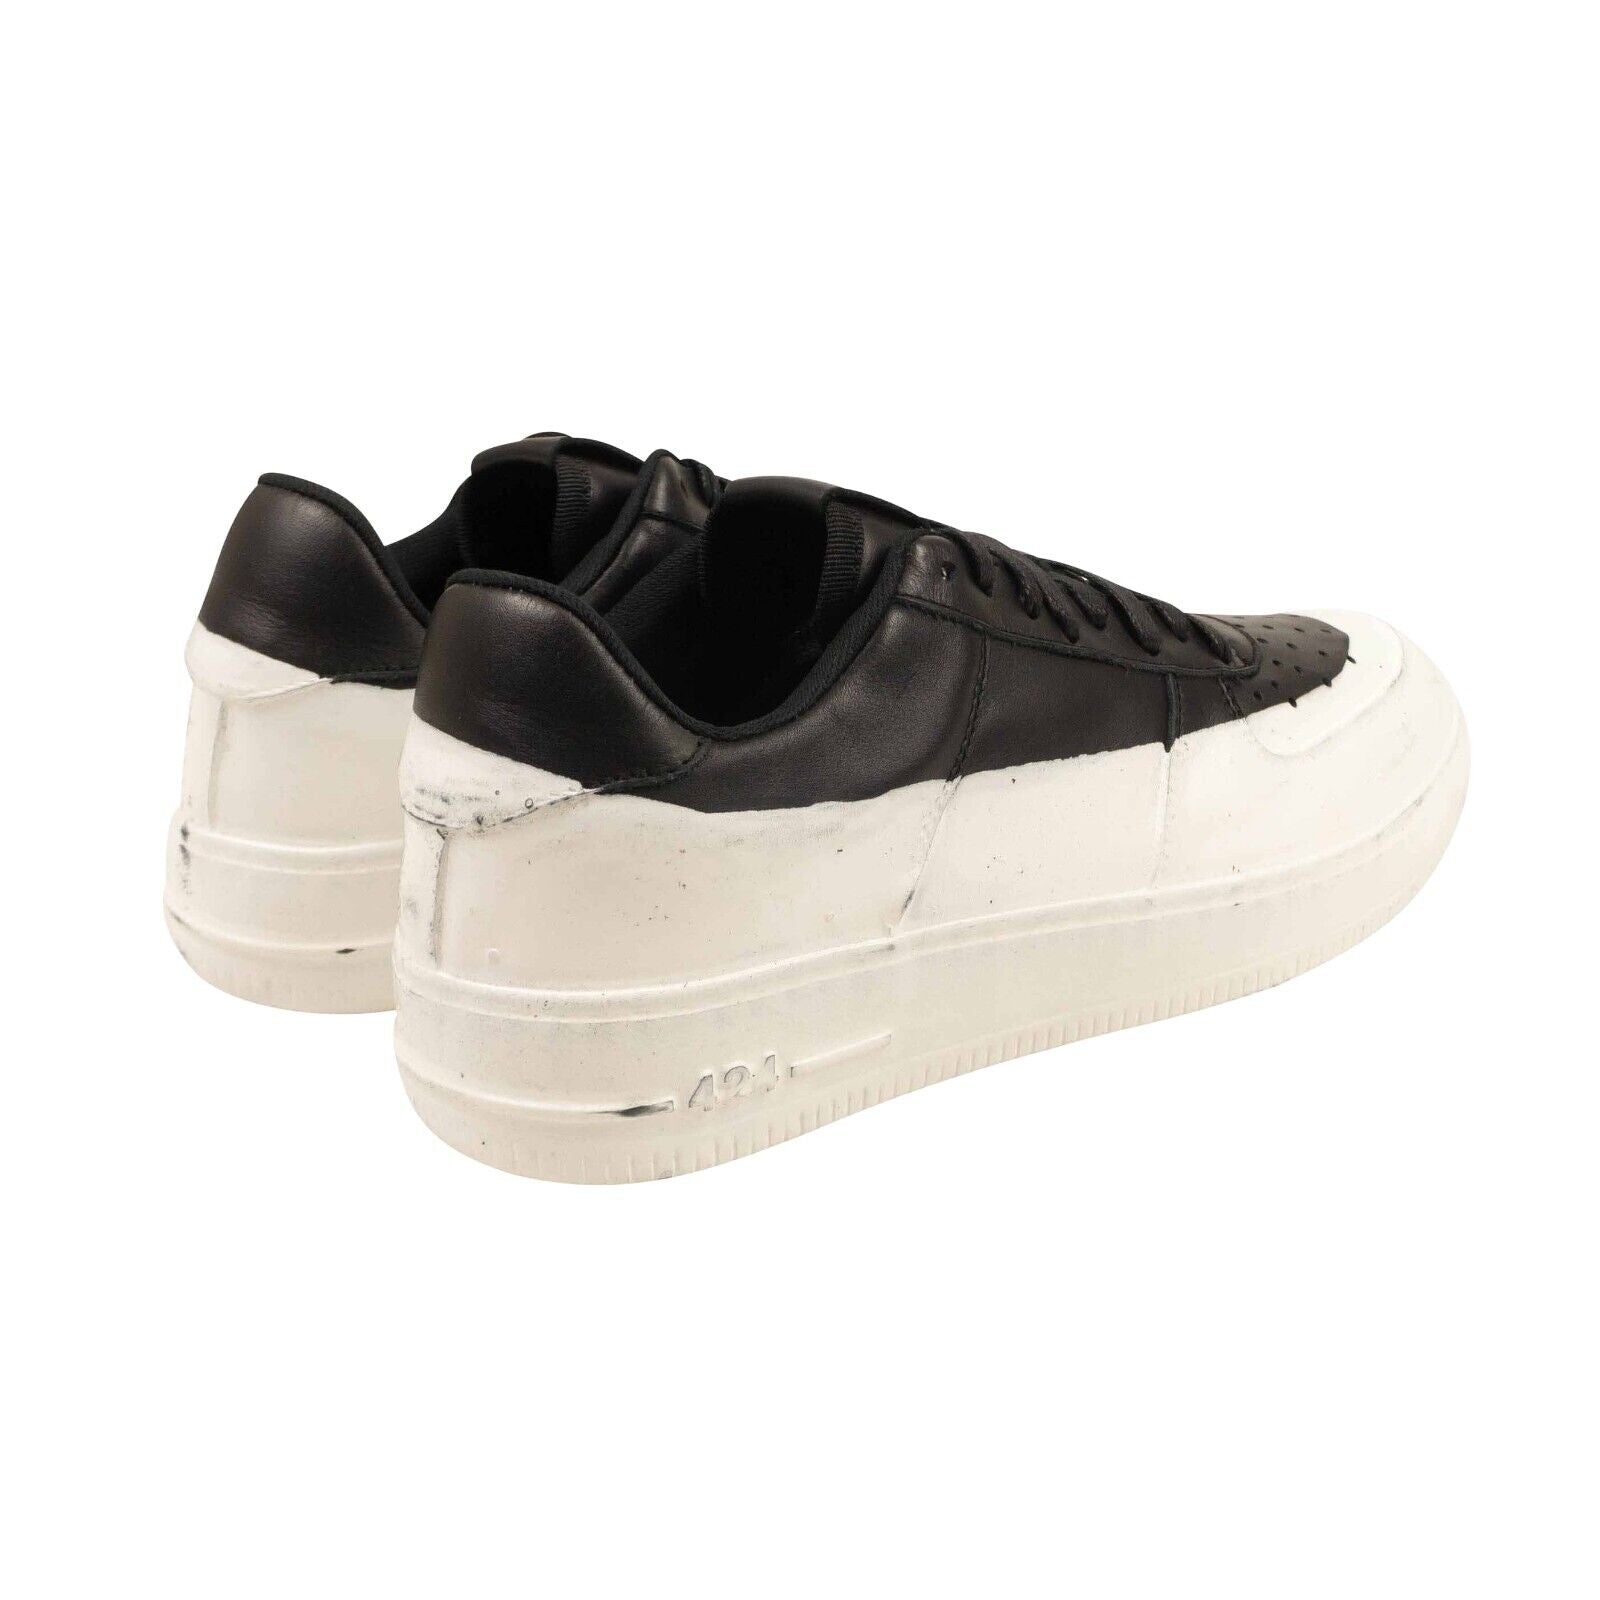 424 On Fairfax Dip Low Sneaker Barney'S Exclusive - Black